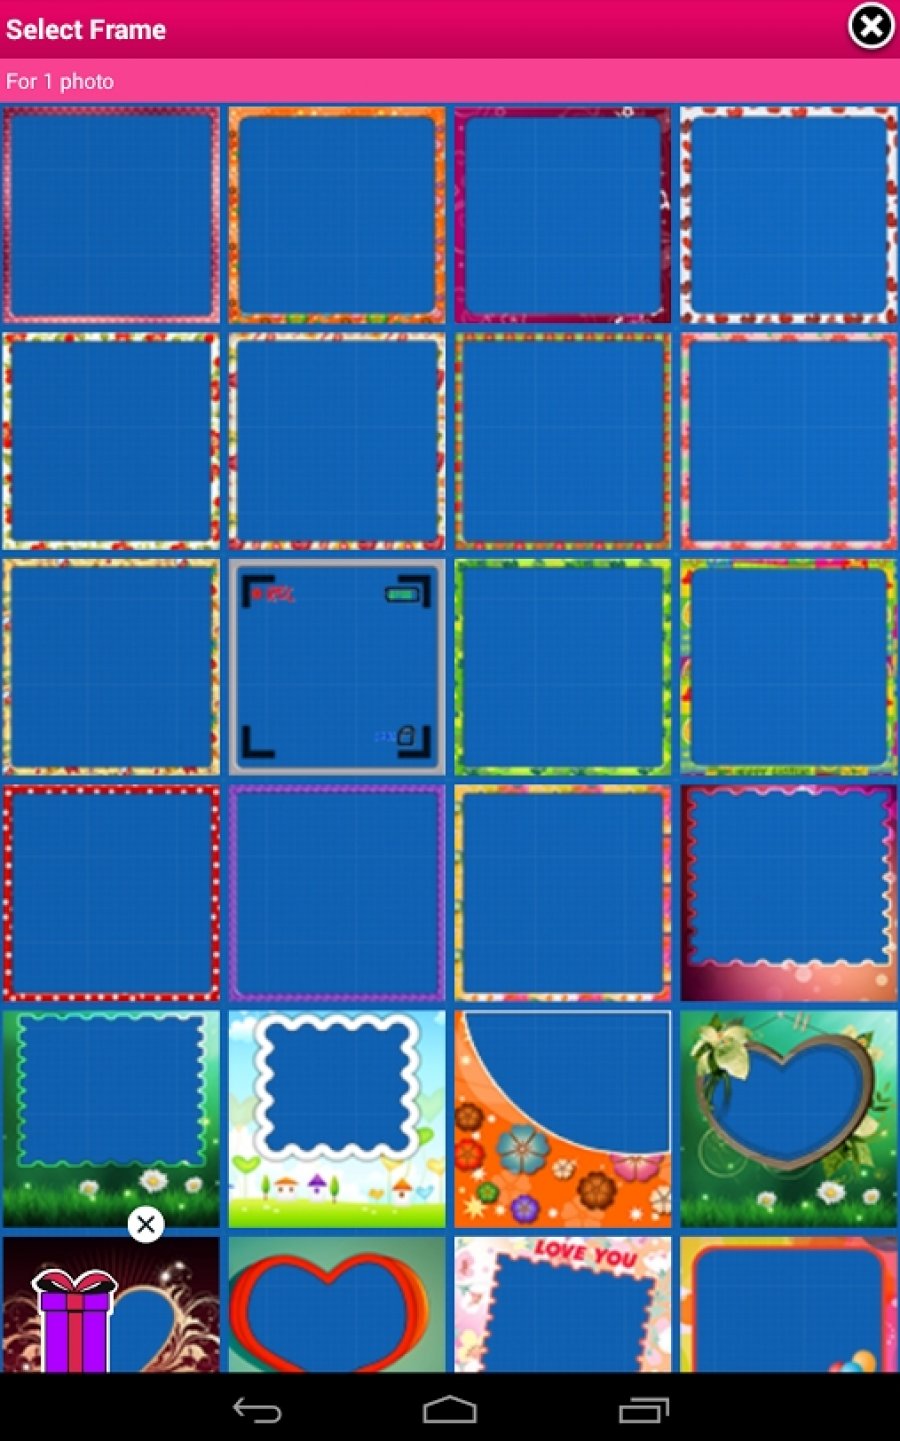 Grid Photo Collage Frames Apk For Android Approm Org Mod Free Full Download Unlimited Money Gold Unlocked All Cheats Hack Latest Version